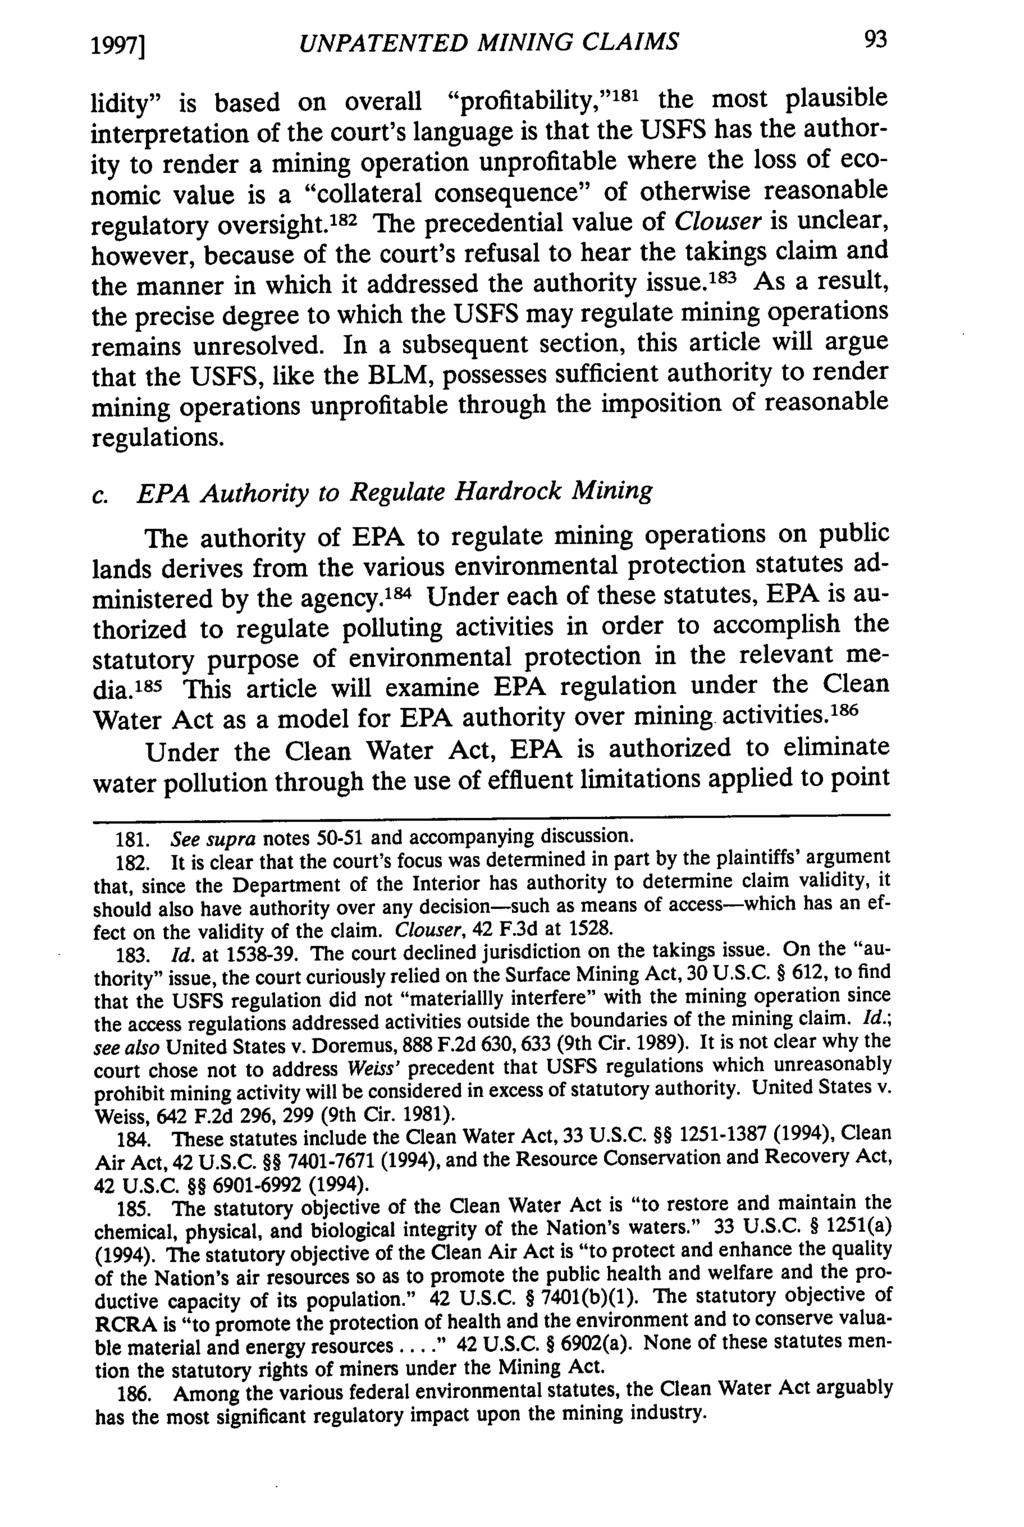 1997] UNPATENTED MINING CLAIMS lidity" is based on overall "profitability,"'' 1 the most plausible interpretation of the court's language is that the USFS has the authority to render a mining